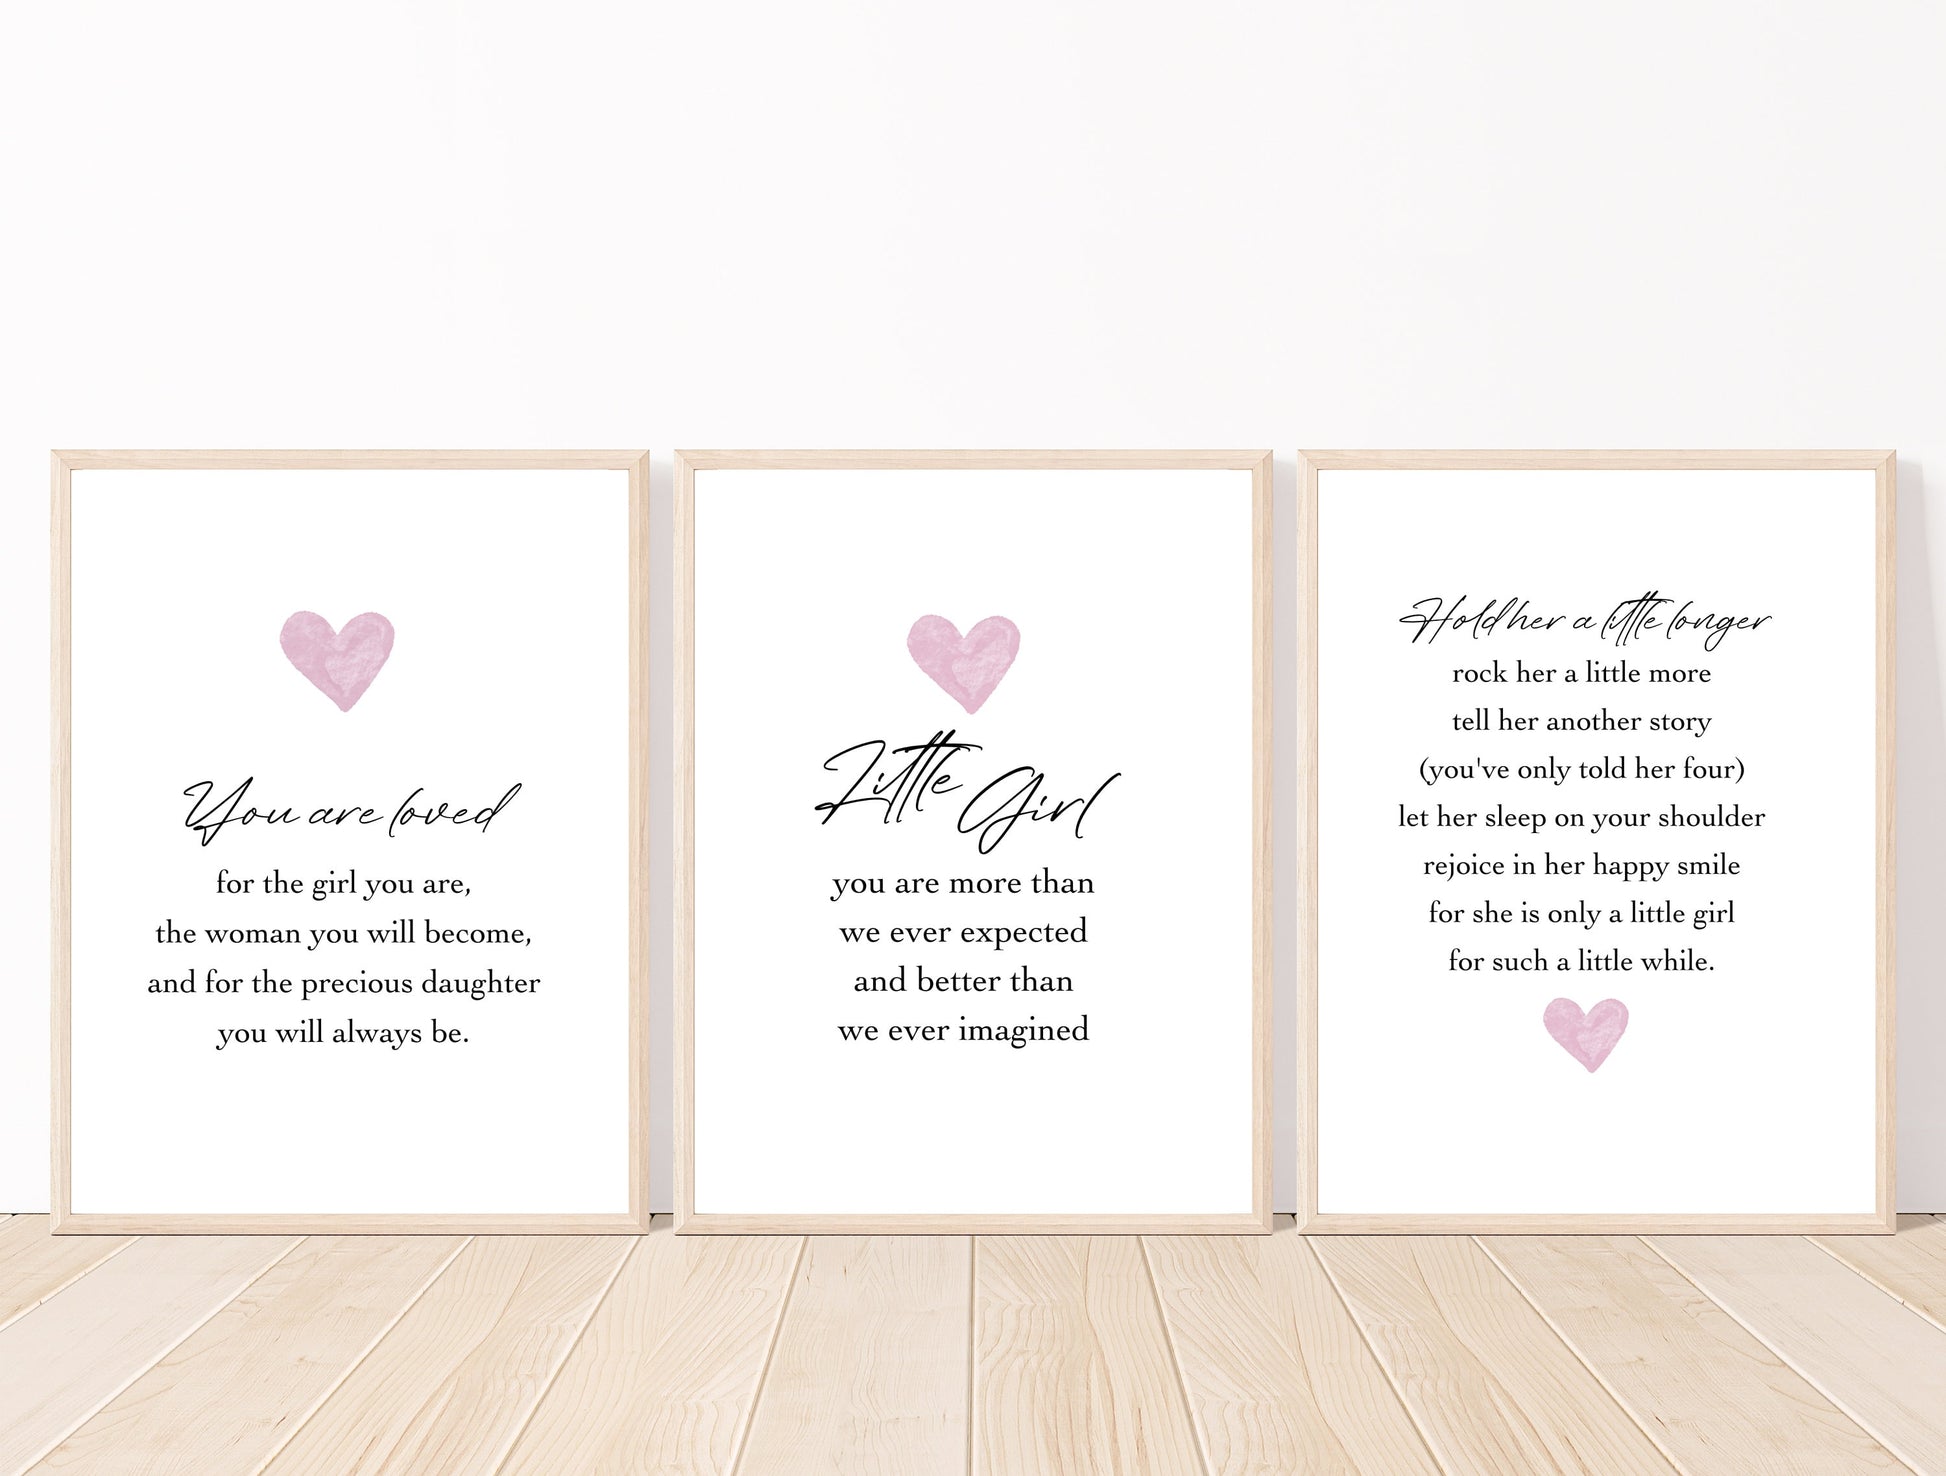 Three frames for a baby girl’s room graphics that are placed on a white wall and parquet flooring. The first one shows a pink heart with a piece of writing below that says: You are loved for the girl you are, the woman you will become, and for the precious daughter you will always be. The middle graphic shows a pink heart with a piece of writing below that says: little girl you are more than we ever expected and better than we ever imagined. The last one has the heart below the piece of writing.